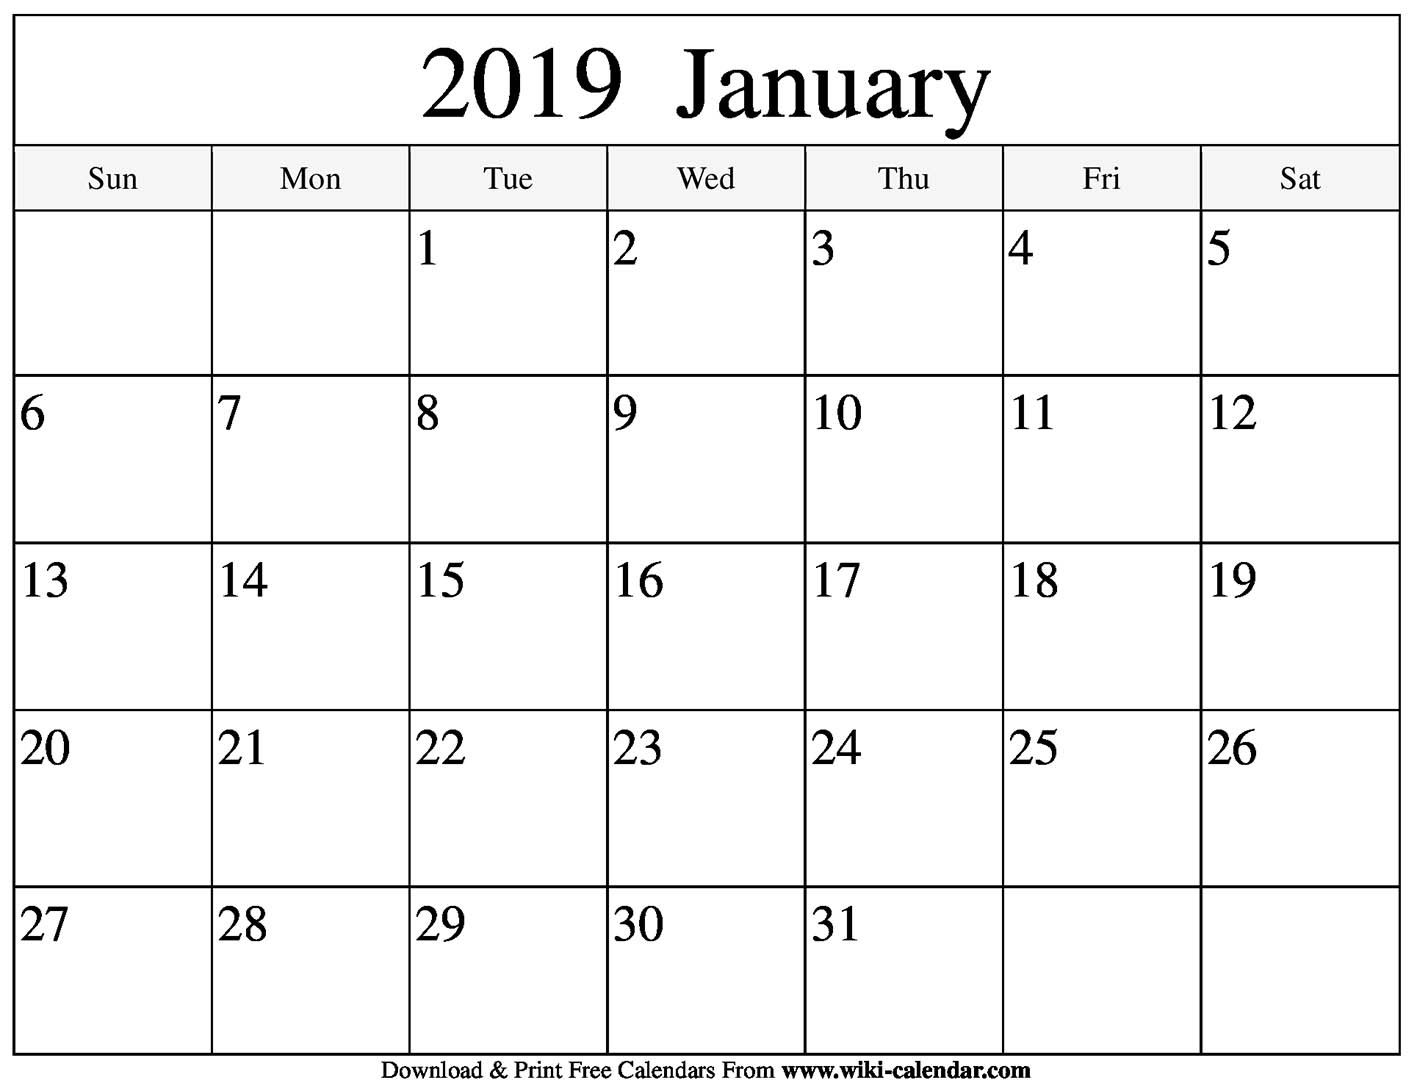 january-wallpapers-70-background-pictures-january-2019-hd-calendar